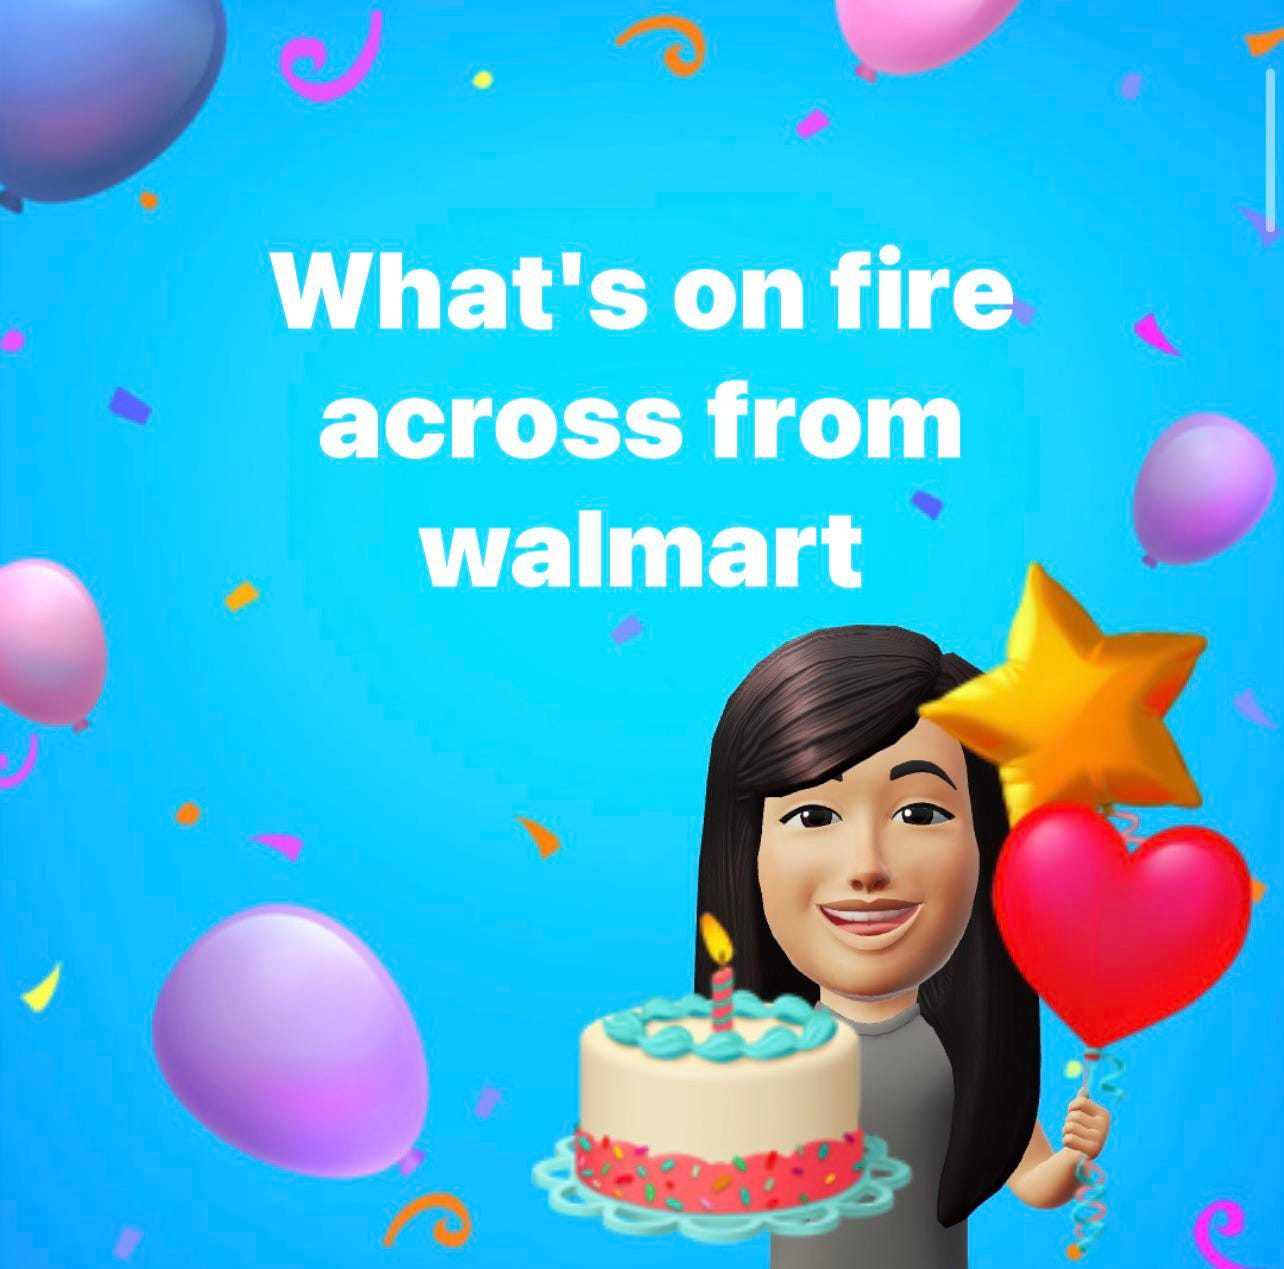 Facebook MeMoji holding birthday cake surrounded by balloons with text "What's on fire across from walmart"